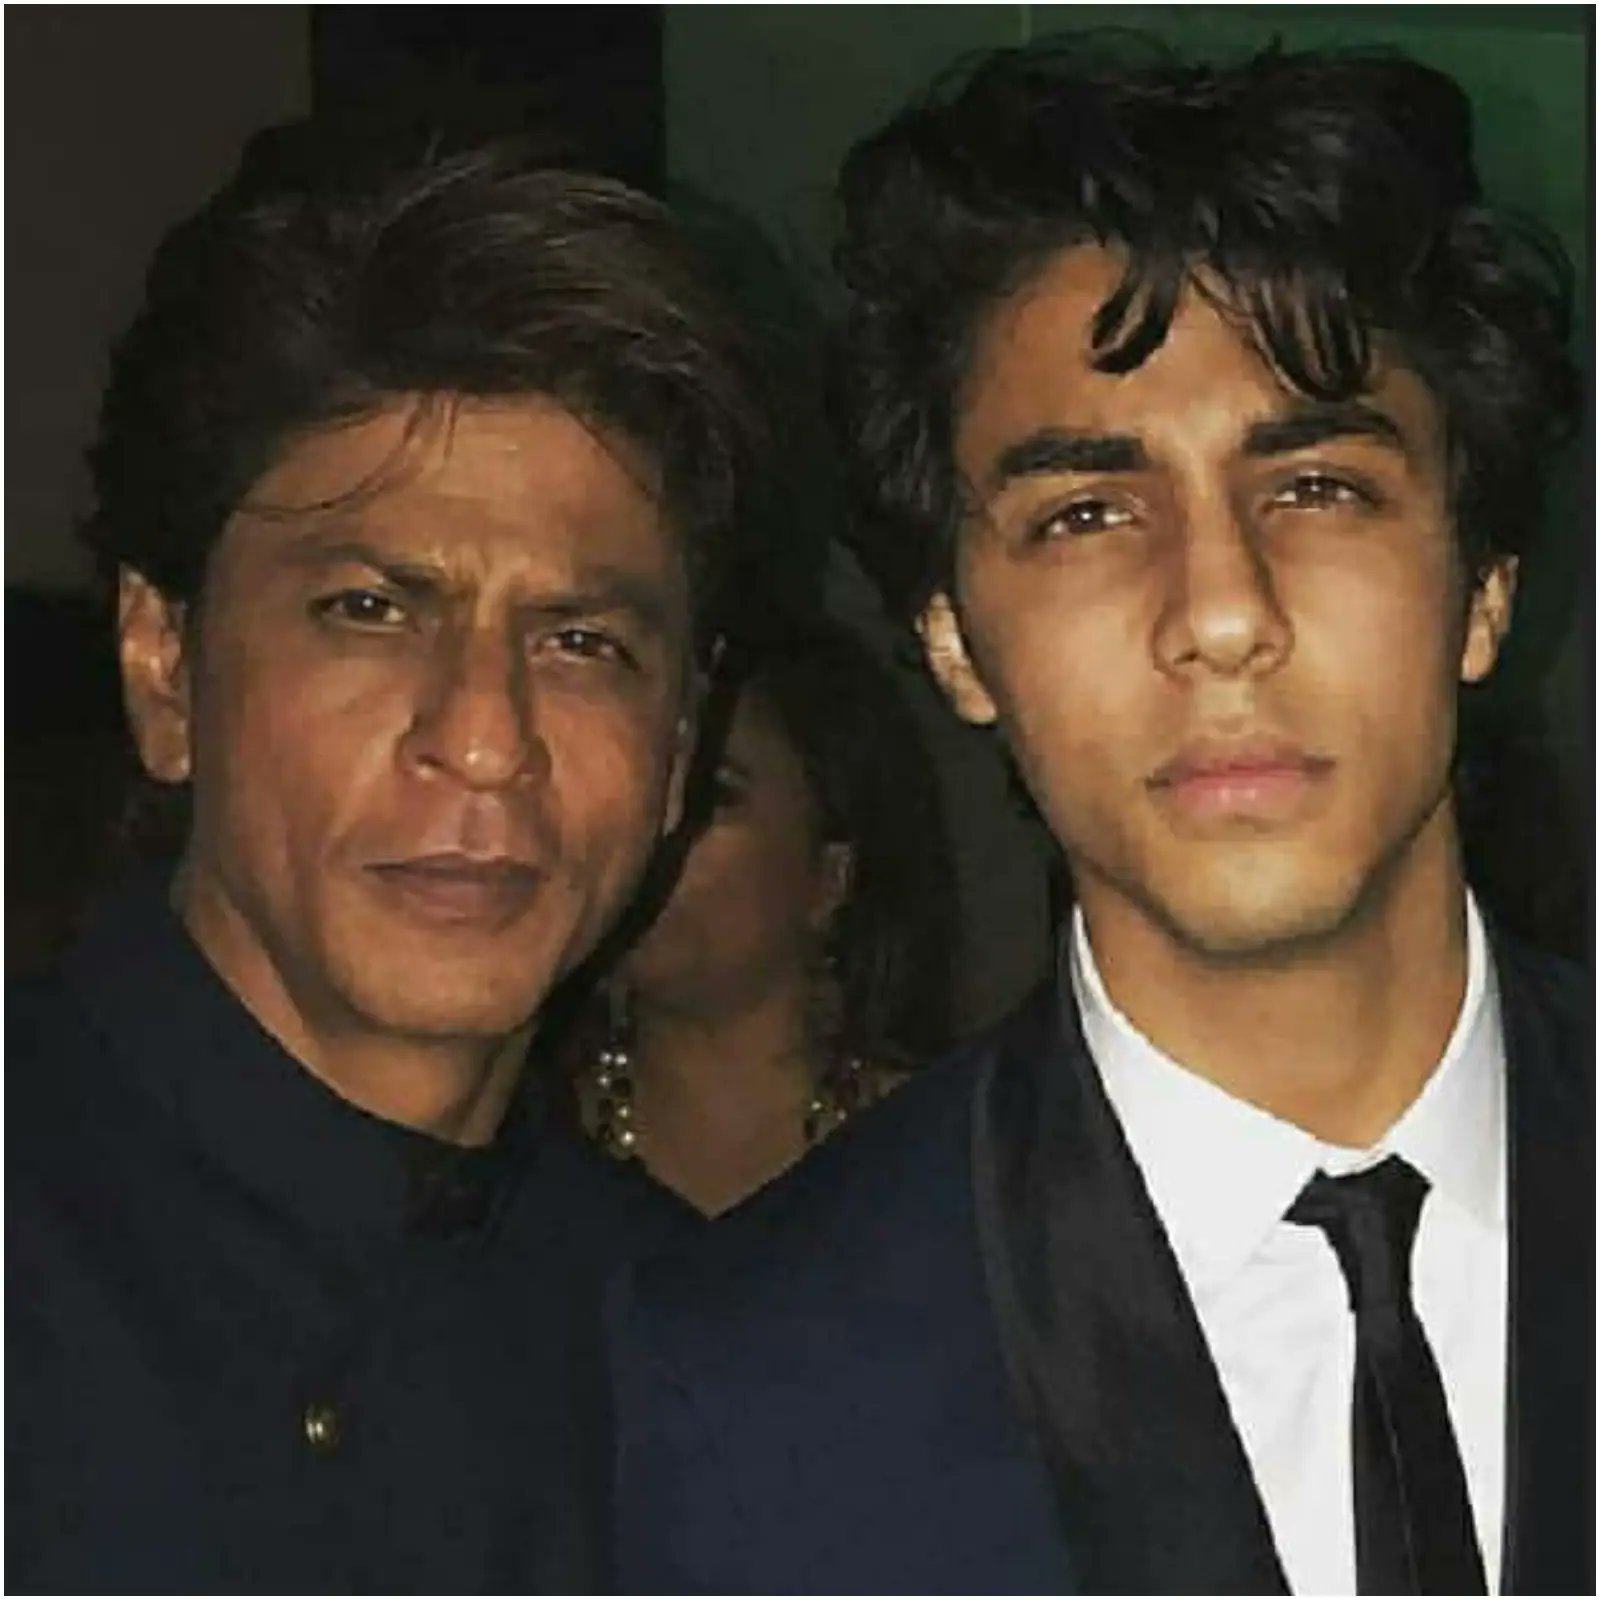 Aryan Khan (right), son of Bollywood megastar Shah Rukh Khan (left), is making waves on social media after sharing photos from a promotional shoot on Instagram. Photo: Twitter/@vaibhavkaushik